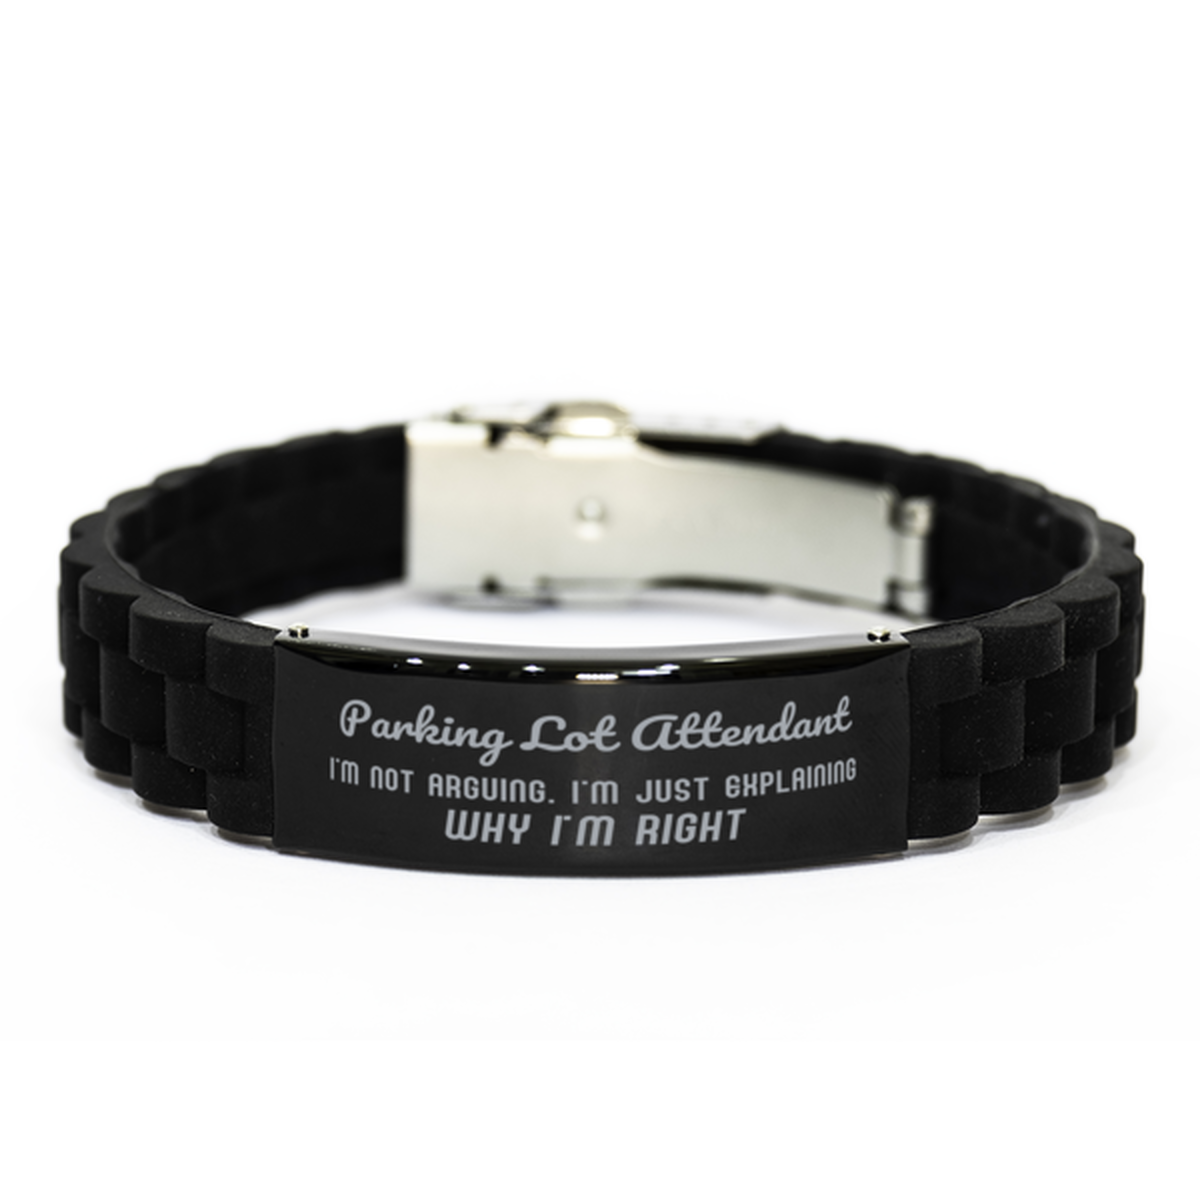 Parking Lot Attendant I'm not Arguing. I'm Just Explaining Why I'm RIGHT Black Glidelock Clasp Bracelet, Funny Saying Quote Parking Lot Attendant Gifts For Parking Lot Attendant Graduation Birthday Christmas Gifts for Men Women Coworker